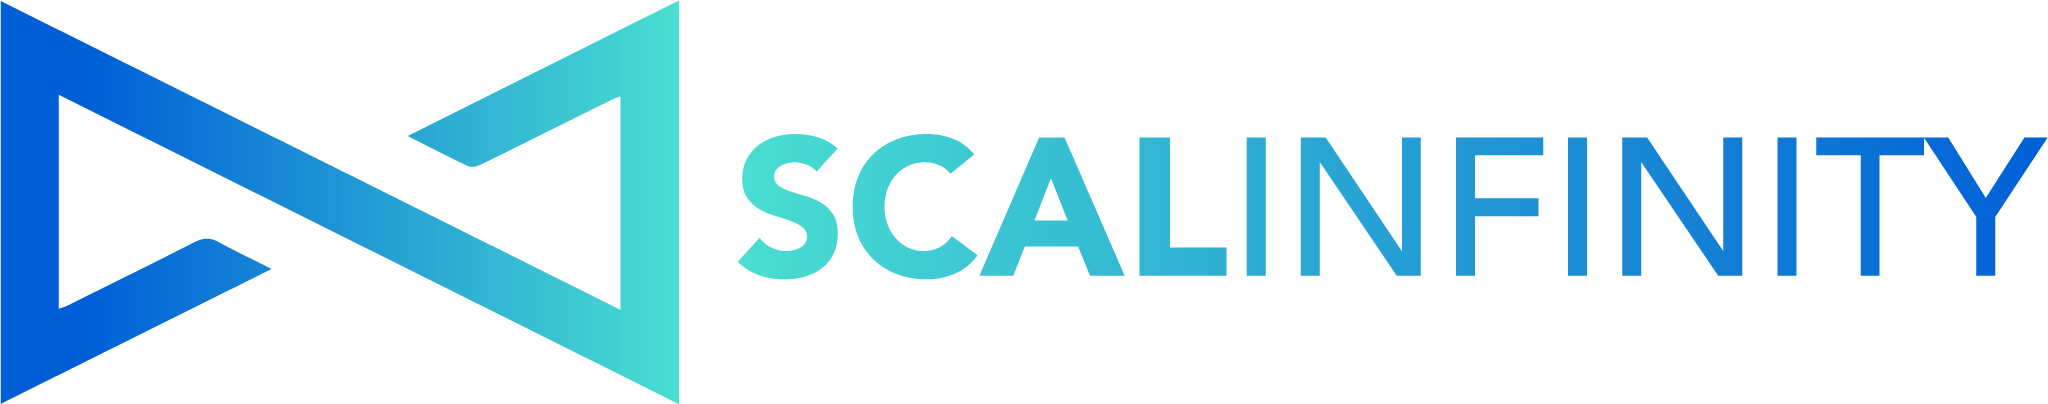 Scalinfinity-LOGO.png